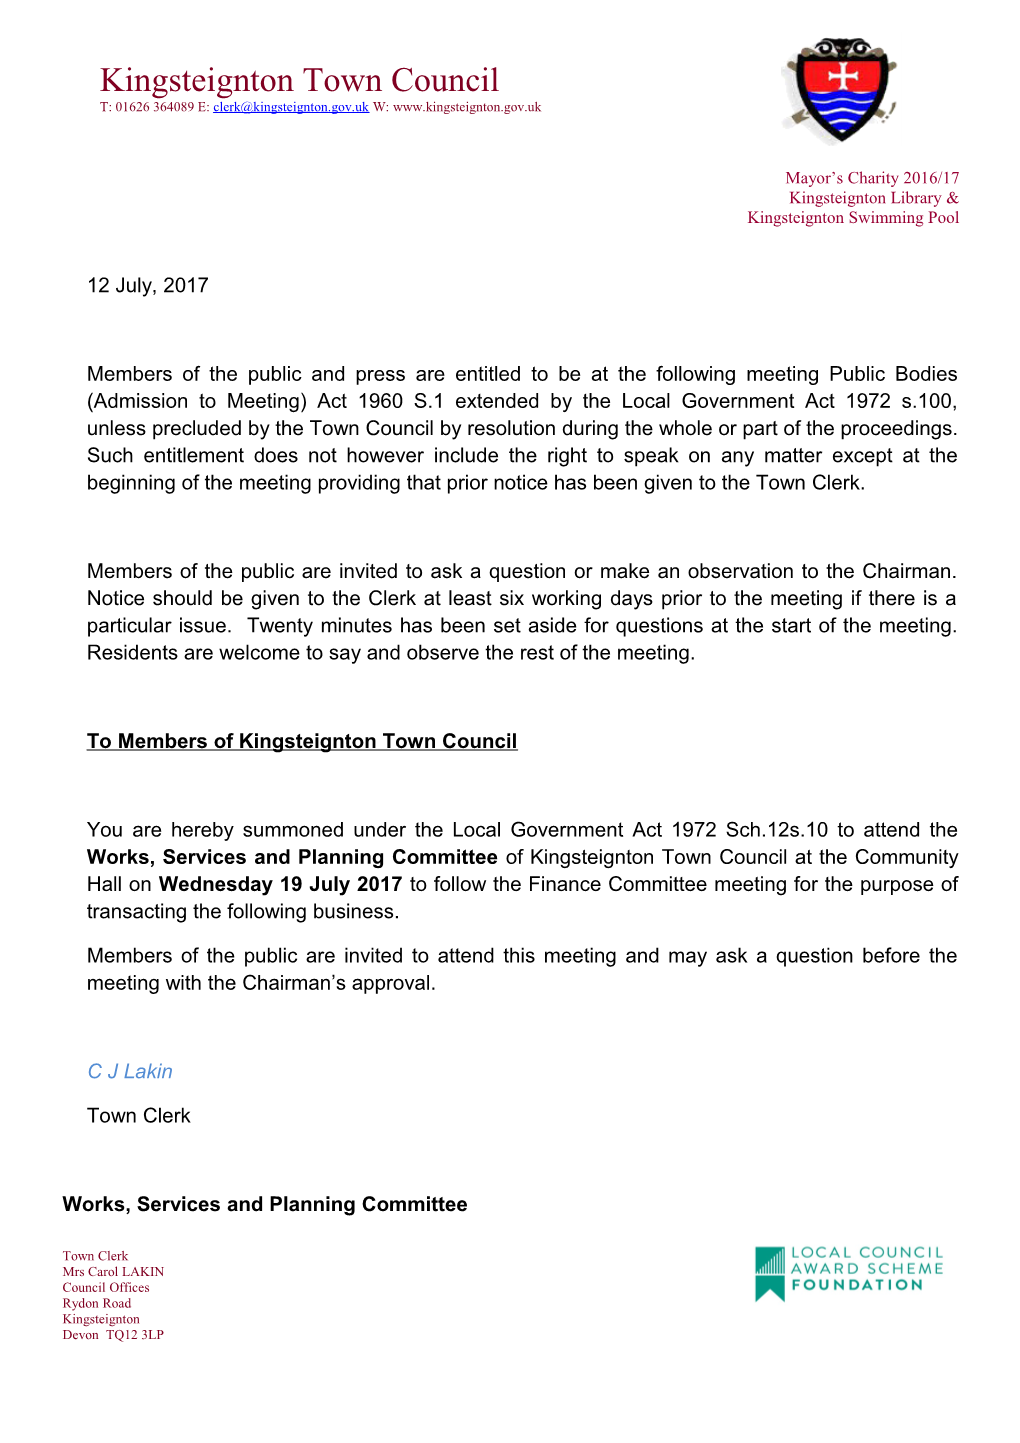 To Members of Kingsteignton Town Council s1